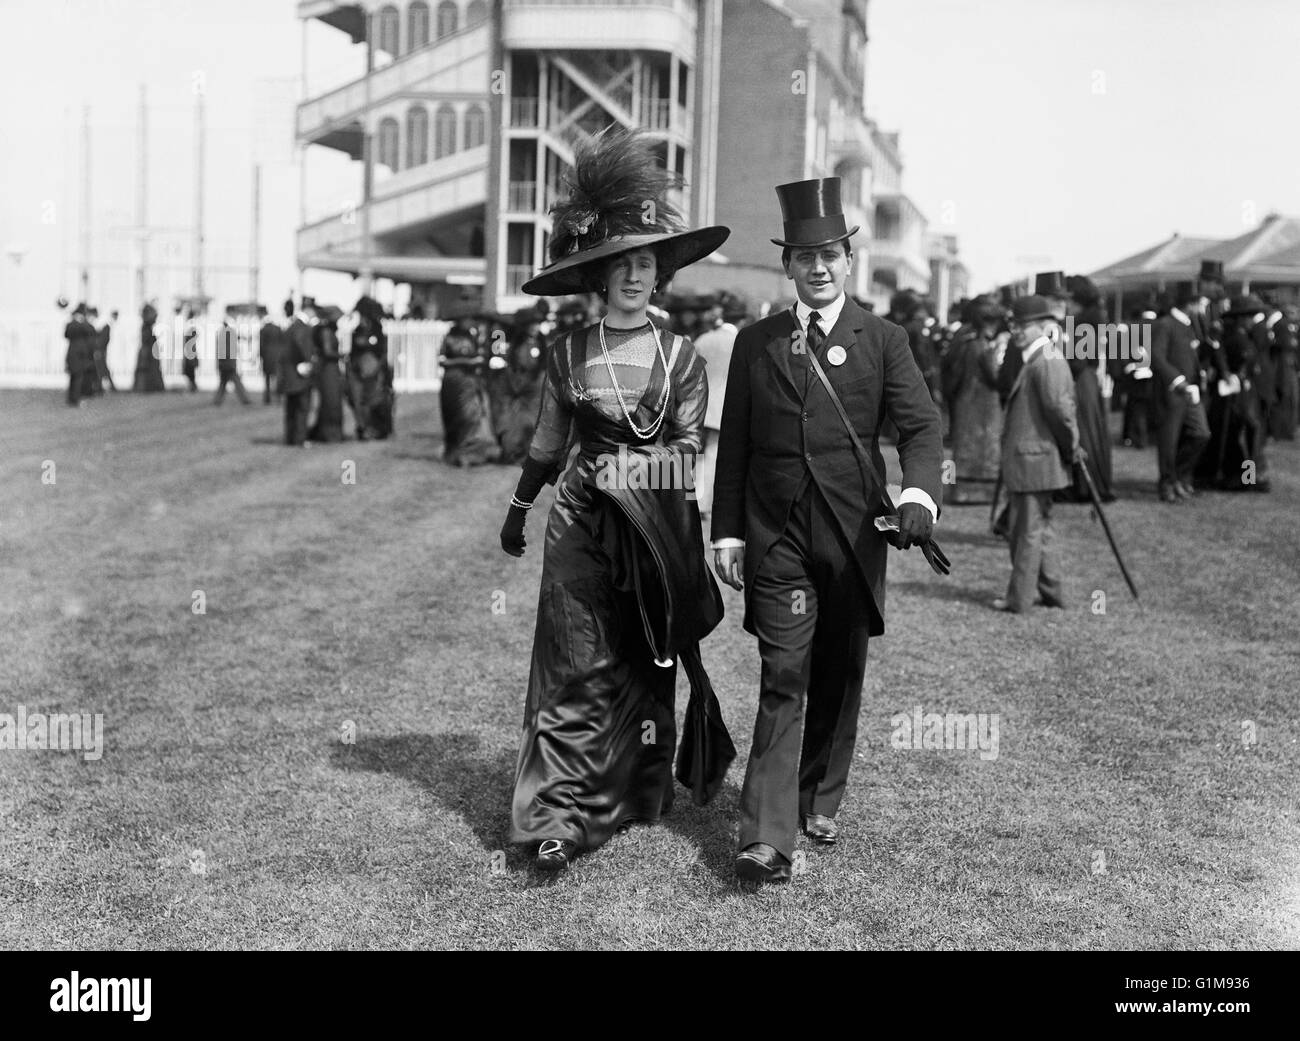 Countess Wedell and the Earl of Portarlington parade on Royal Day at Ascot. ... Horse Racing - Royal Ascot - 1910 ... 17-06-1910 ... Surrey ... UK ... Photo credit should read: PA/Unique Reference No. 1628238 ... Lionel Arthur Henry Seymour Dawson-Damer, 6th Earl of Portarlington Stock Photo